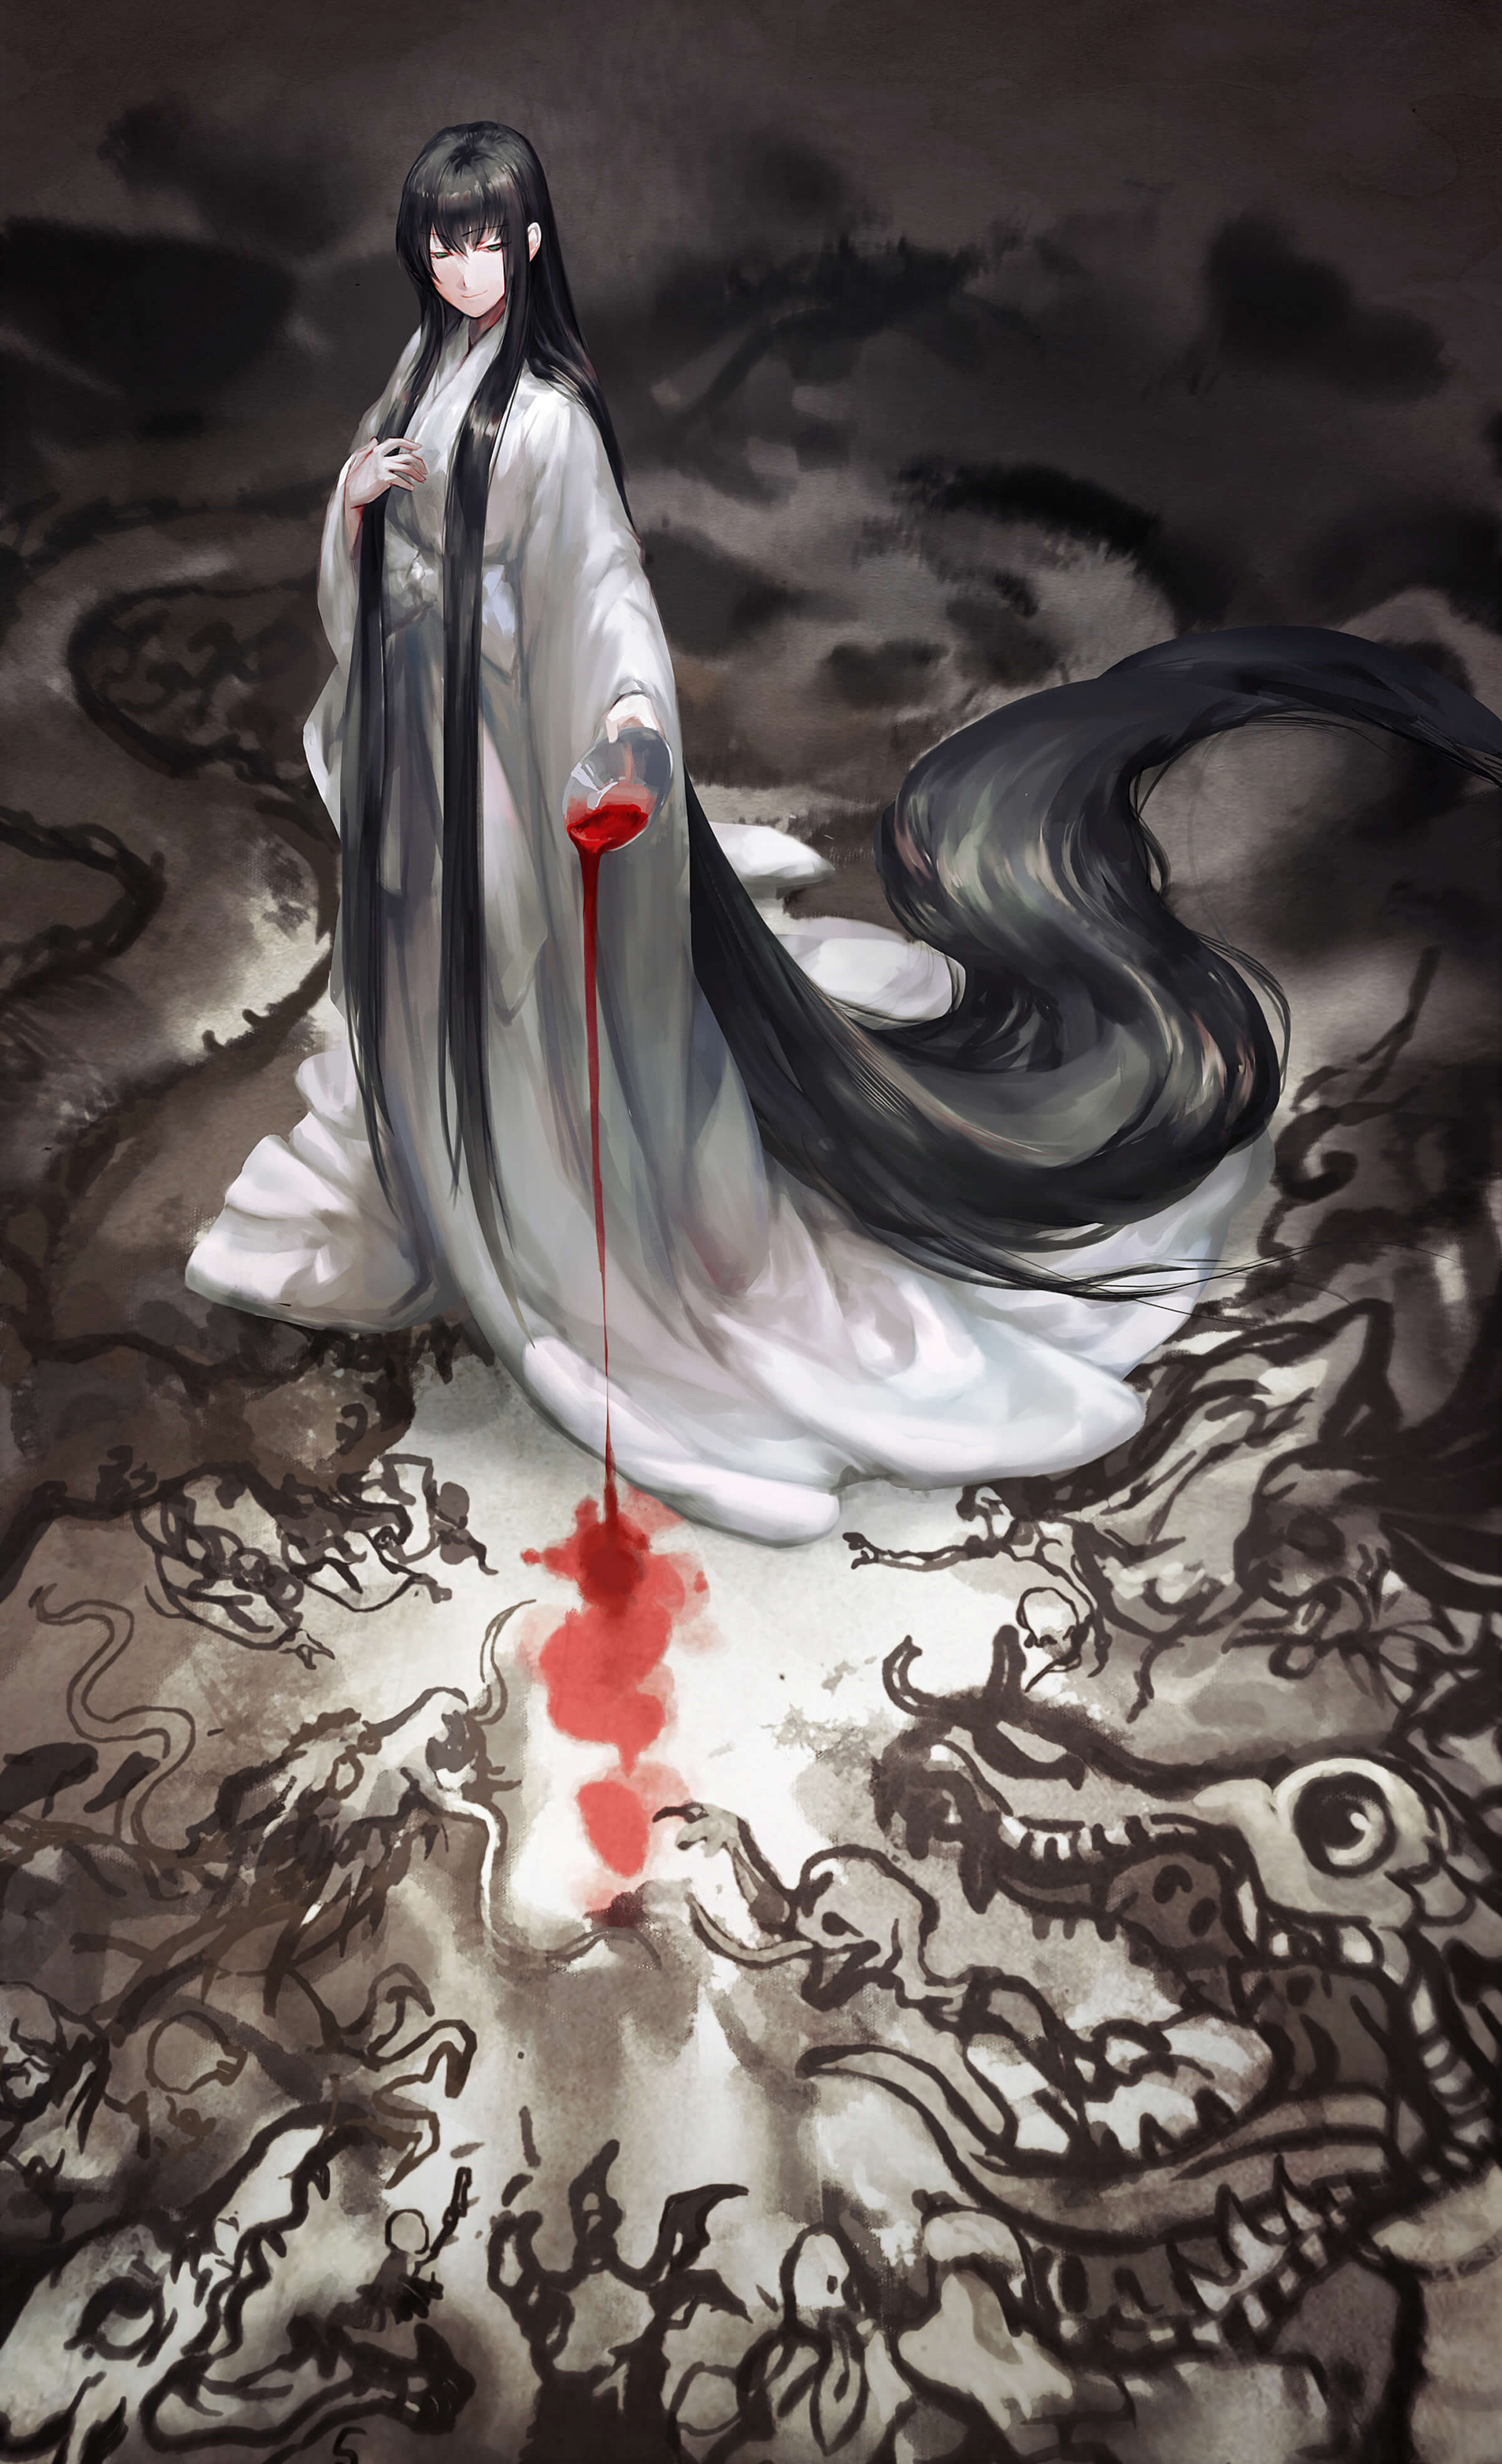 digital painting of a female in a white kimono pouring red liquid onto a surface imprinted with caricatures of dragons